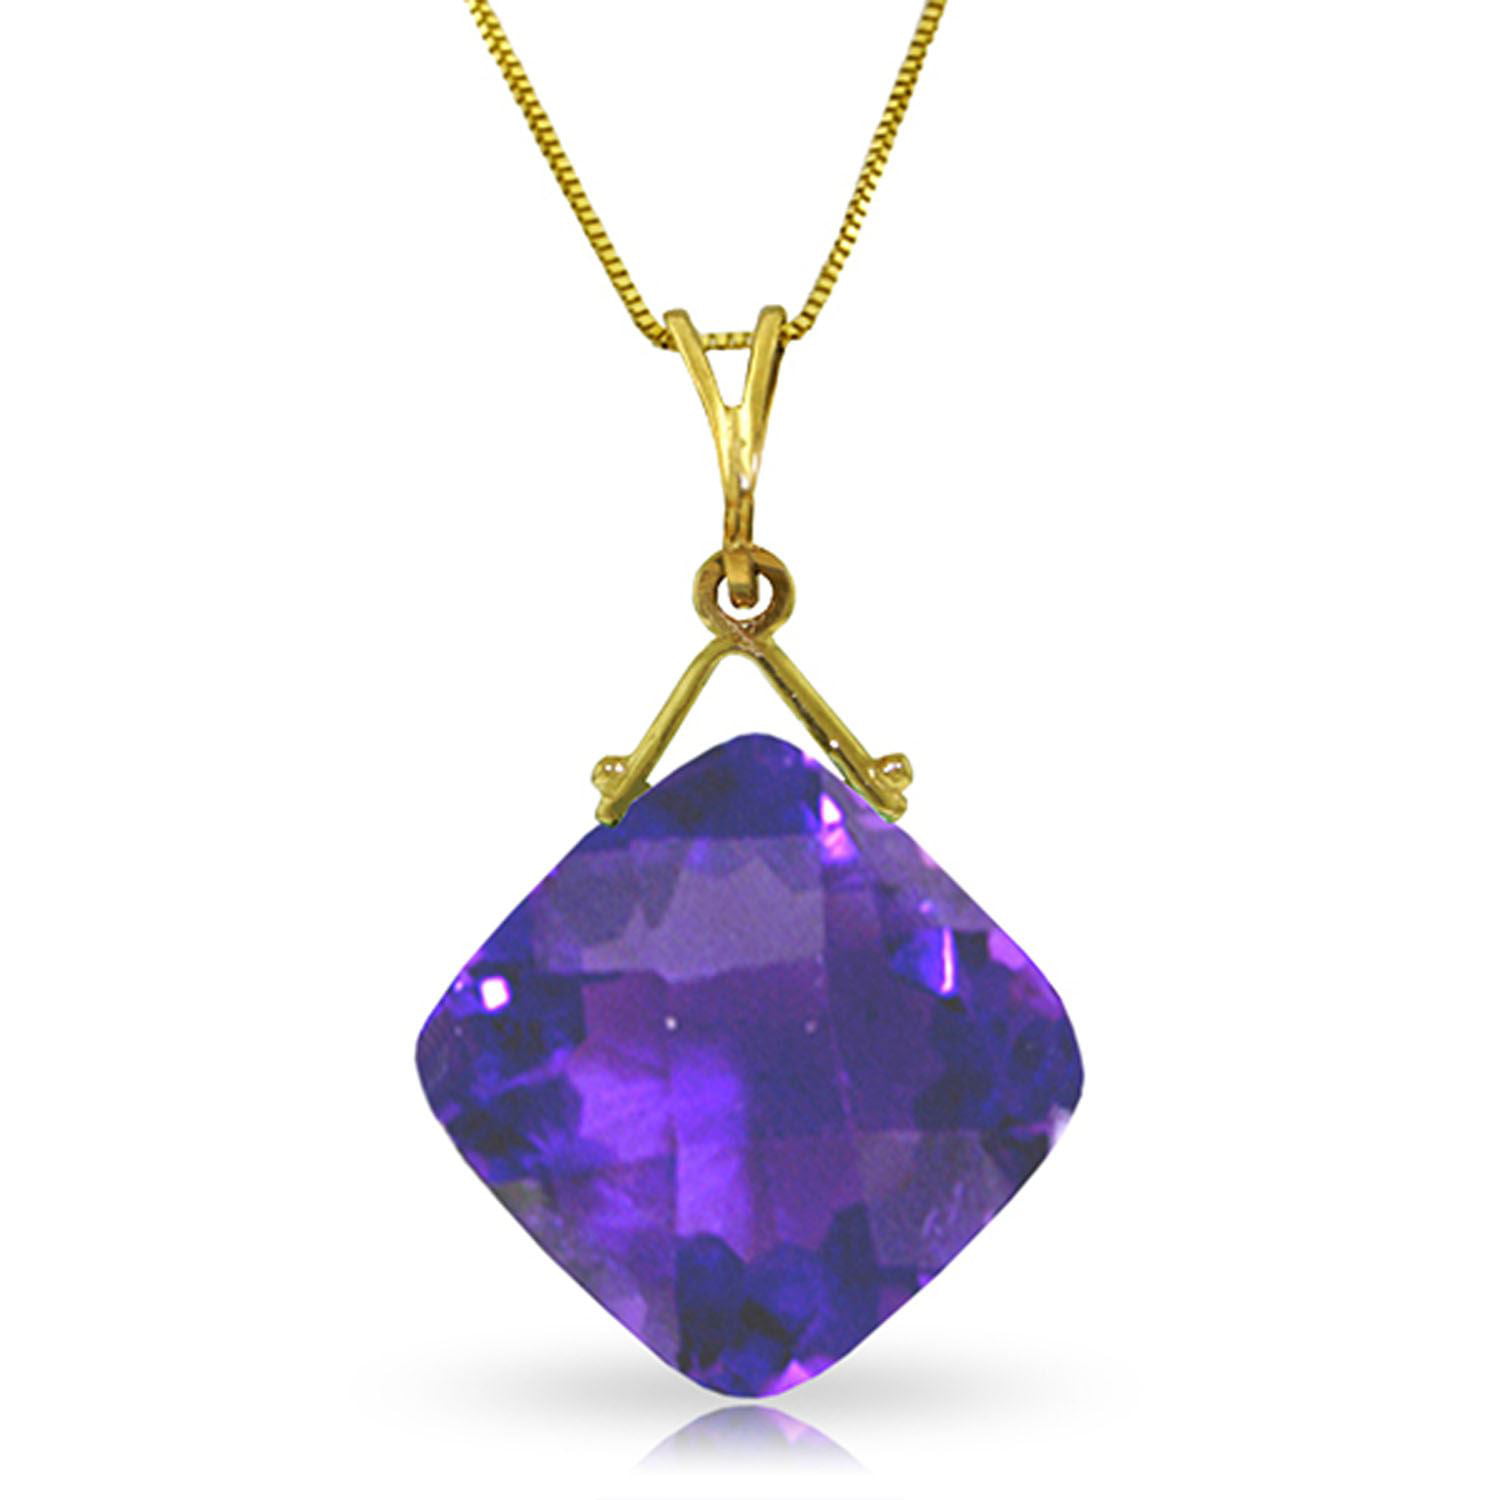 ALARRI 1.23 CTW 14K Solid White Gold Necklace Natural Diamond Purple Amethyst with 22 Inch Chain Length